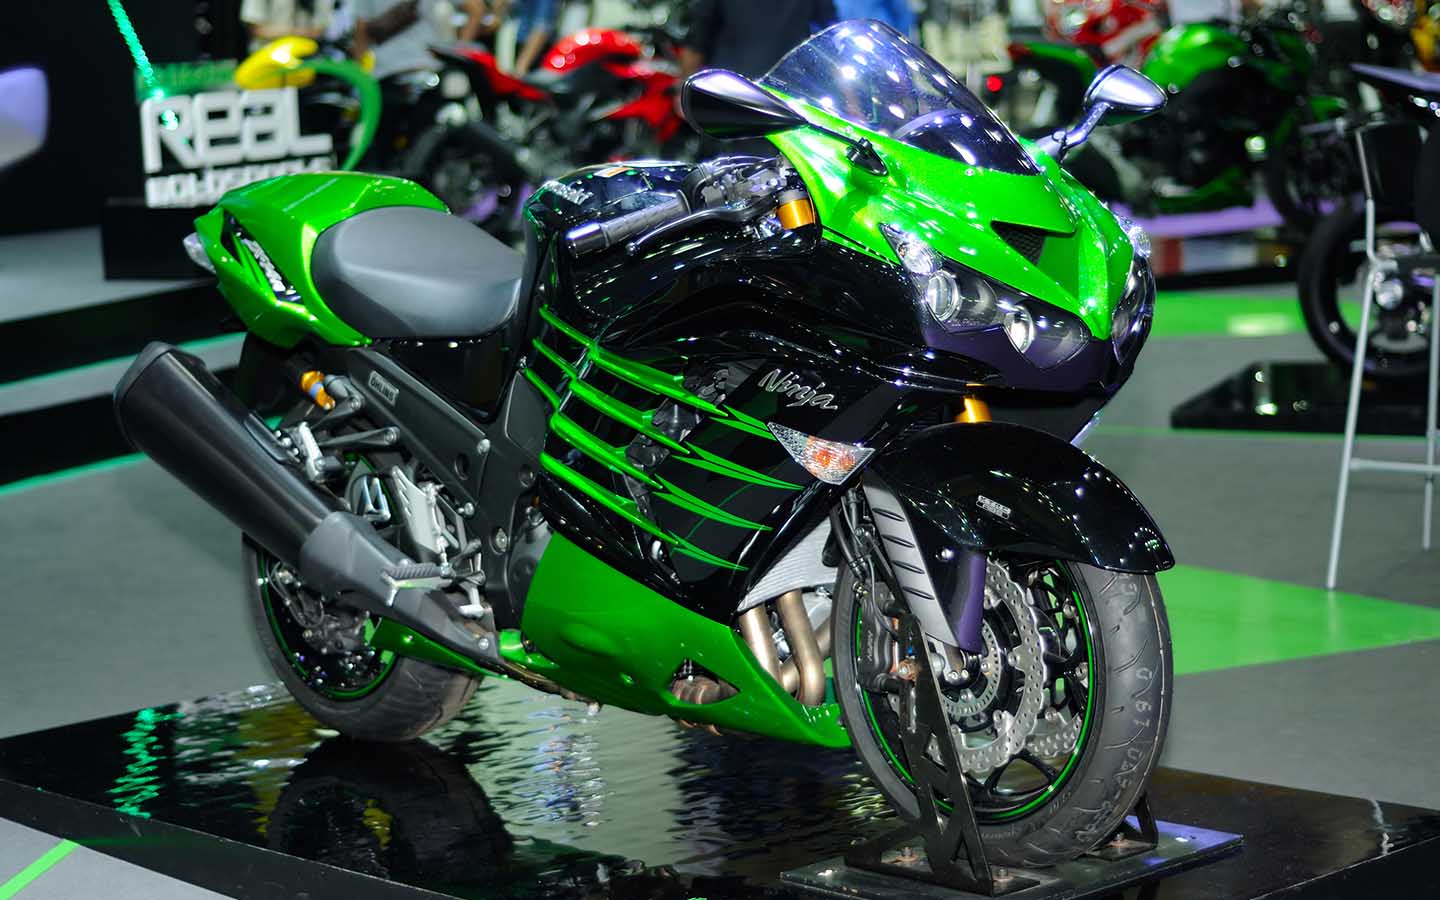 the Kawasaki Ninja ZX-14R is known to be the fastest bike in the world